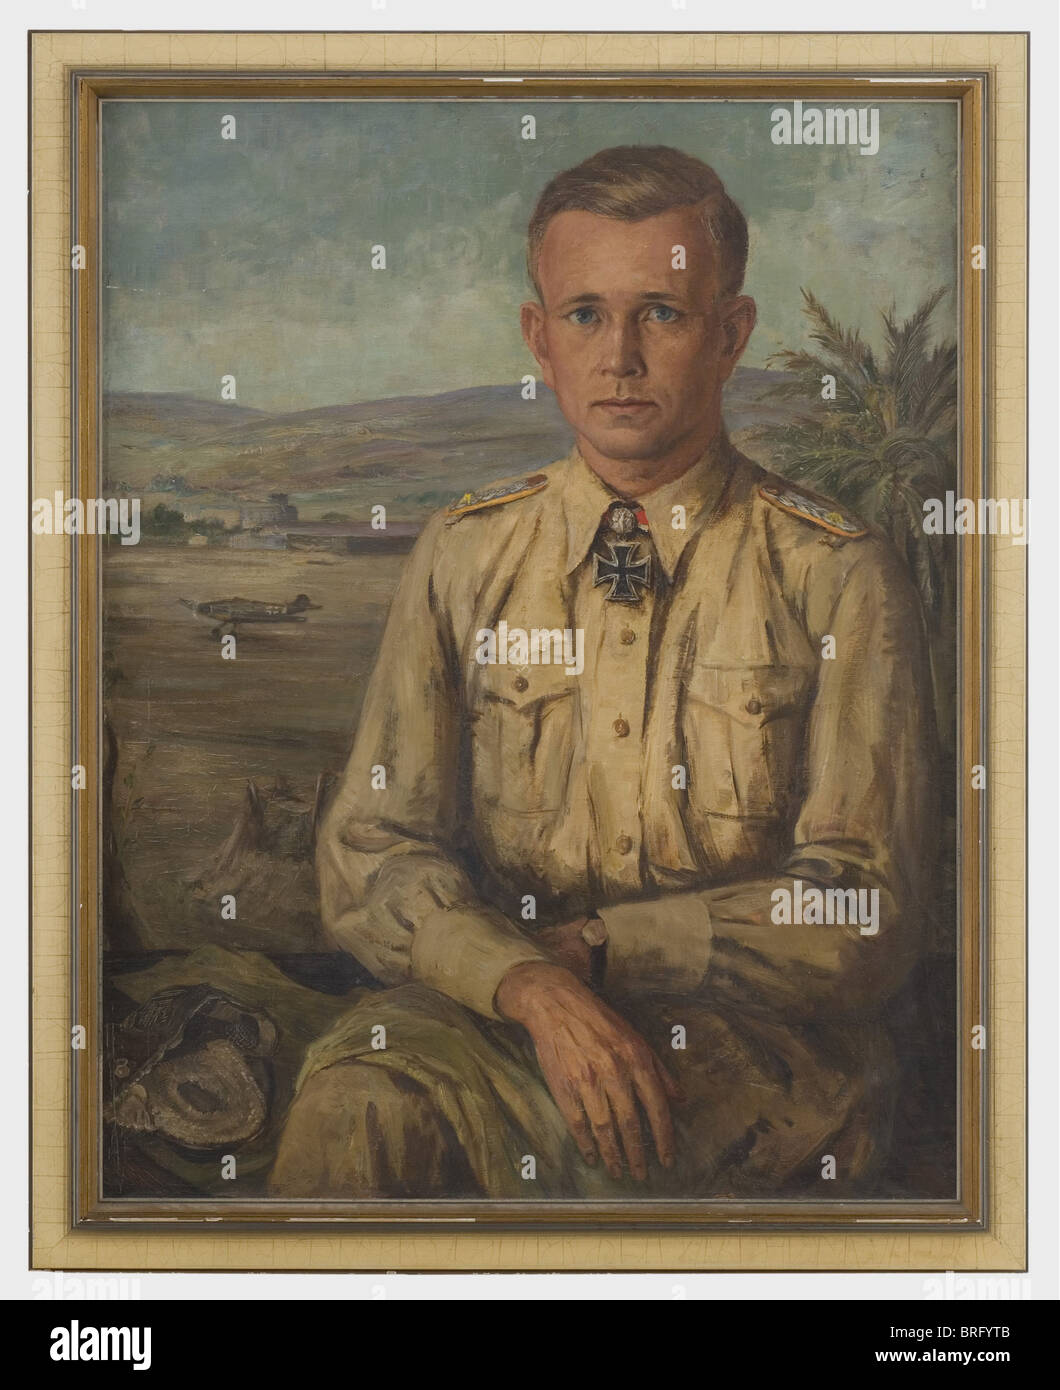 Oberst Günther Freiherr von Maltzahn (1910 - 1953), a portrait Oil on canvas. The fighter pilot and squadron commander as a Lieutenant Colonel wearing the Knight's Cross of the Iron Cross with Oakleaves, his headgear beside him, in front of a flying field in North Africa. Slightly crackled with a small touch-up in the upper right. In a modern frame, slightly damaged. Portrait dimensions 70 x 90 cm, framed dimensions 81 x 100. Colonel von Maltzahn, with 68 air victories, was commander of the famed Flying Squadron 53 'Pik As' (Ace of Spades) from 1940 to 1943. In, Stock Photo